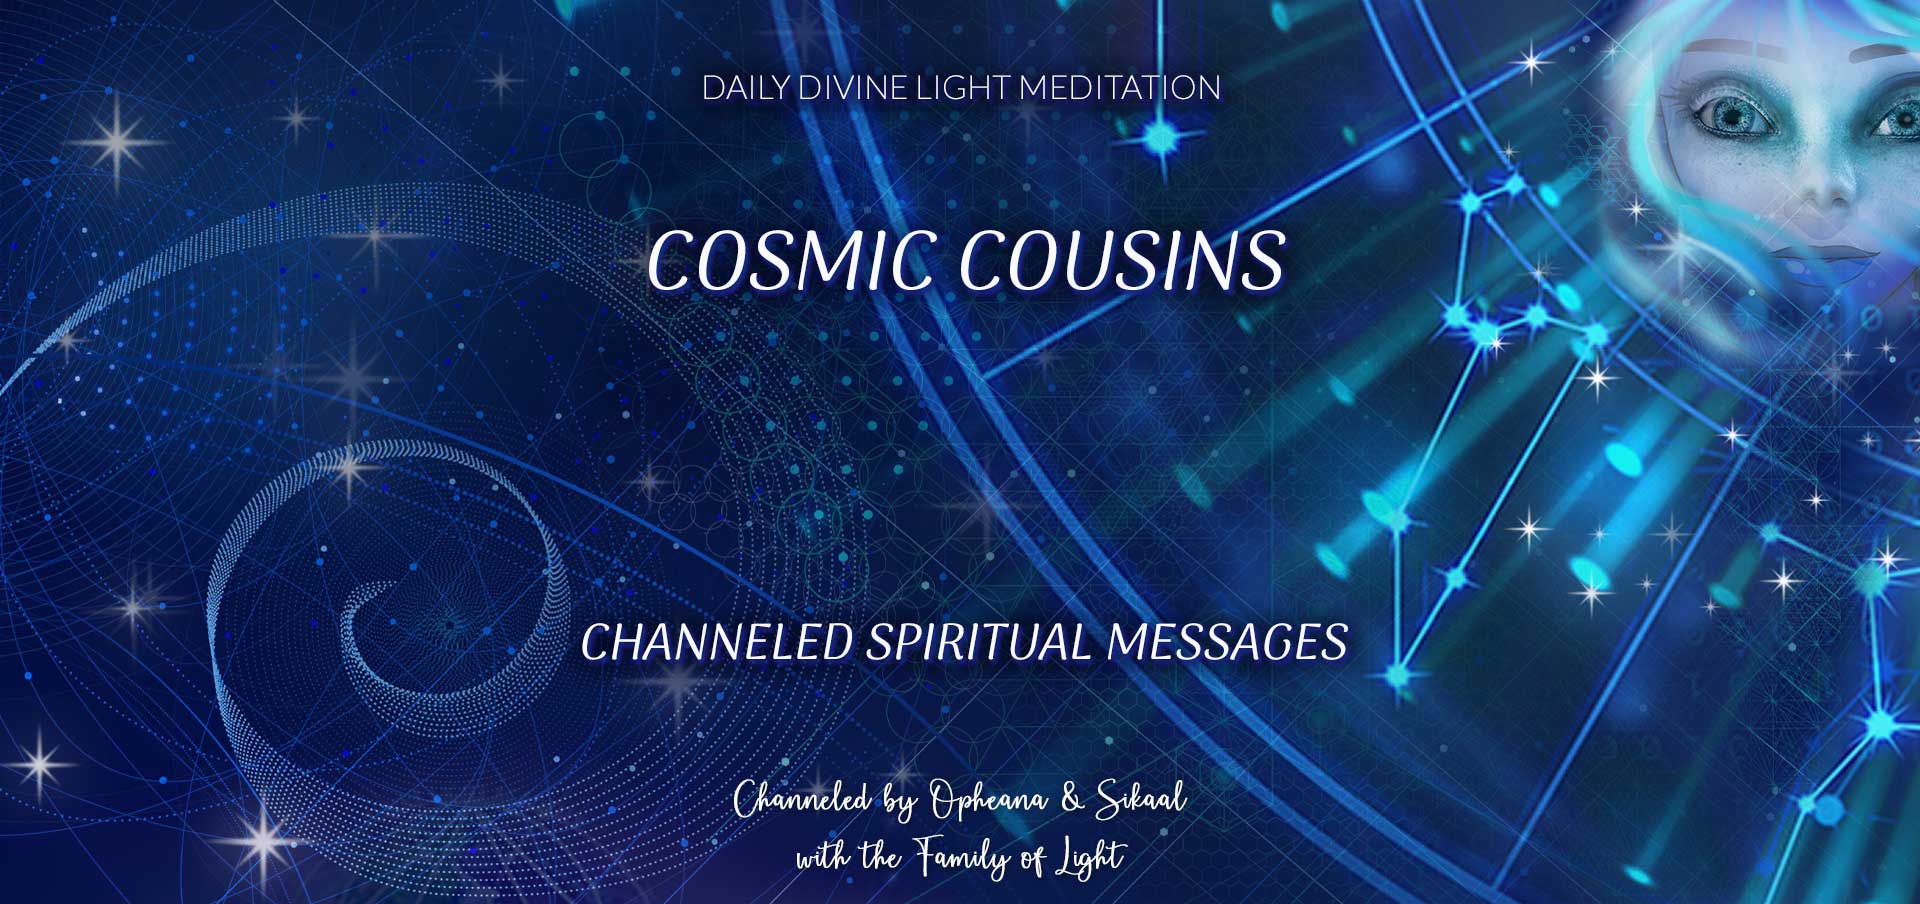 Daily Divine Light Meditation ~ Channeled Spiritual Messages ~ Cosmic Cousins ~ Wednesday 19 July 2023